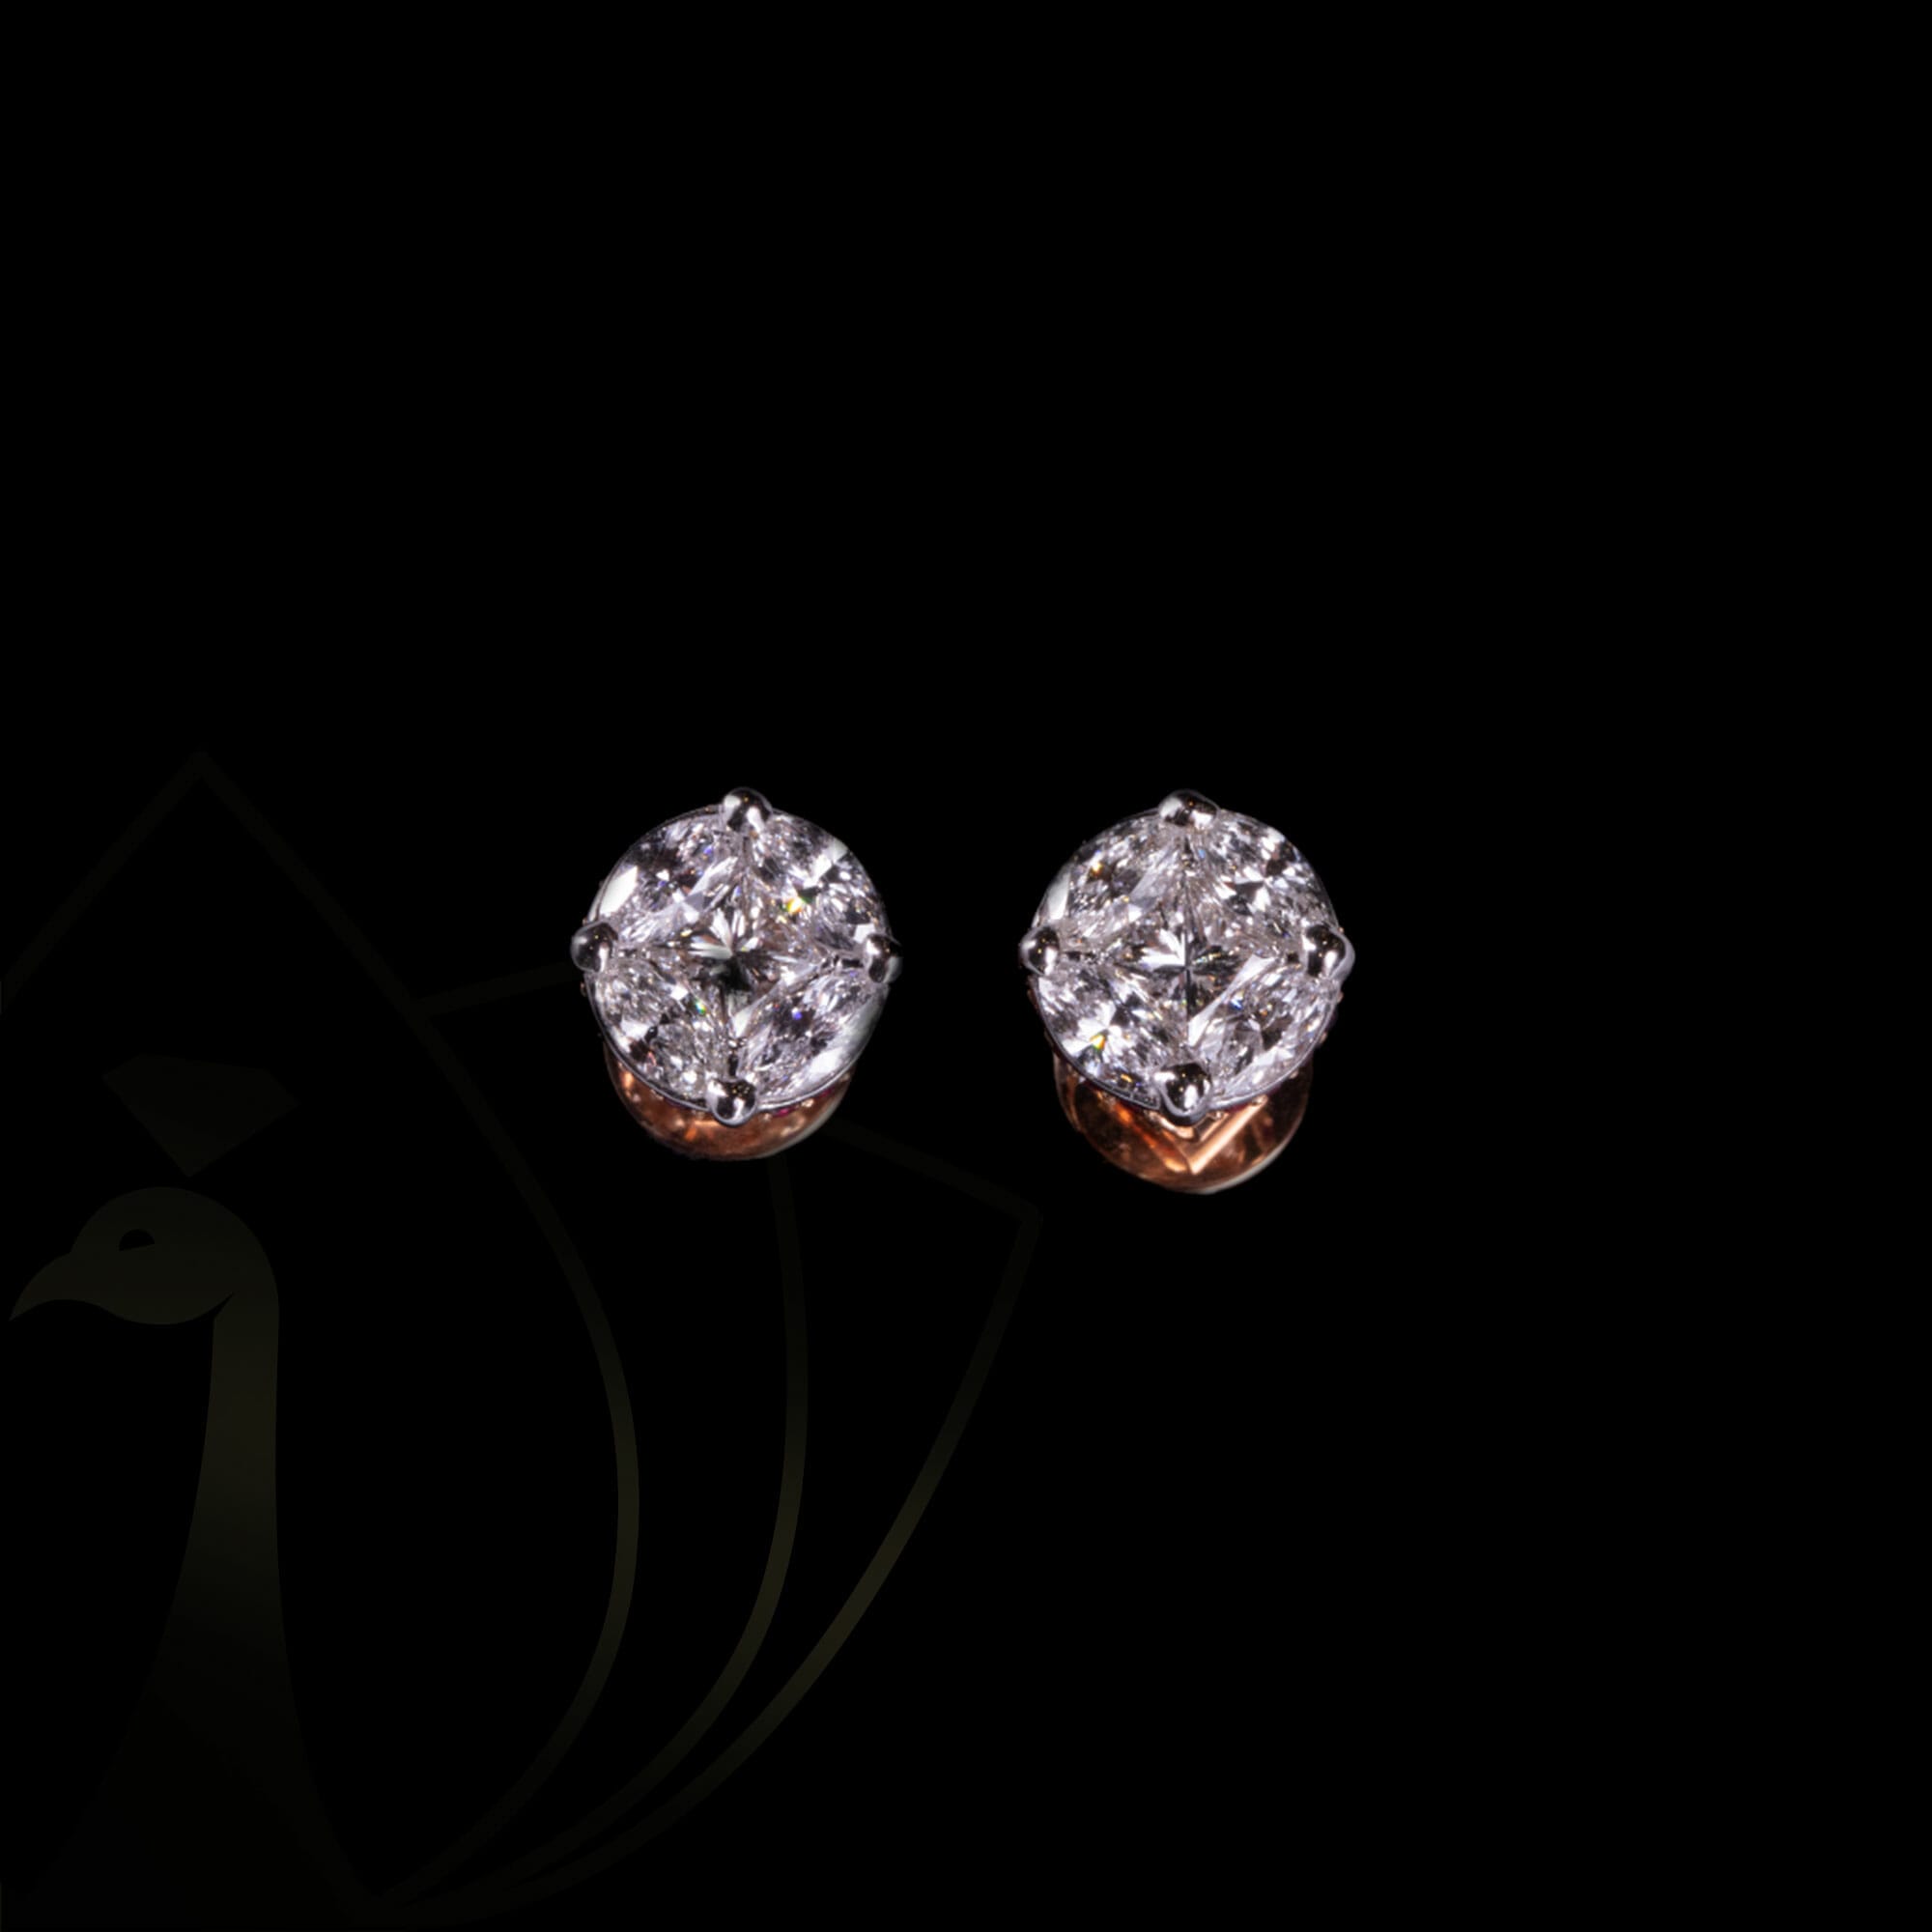 Rounded Radiance Diamond Earrings from our exclusive Gulz Collection